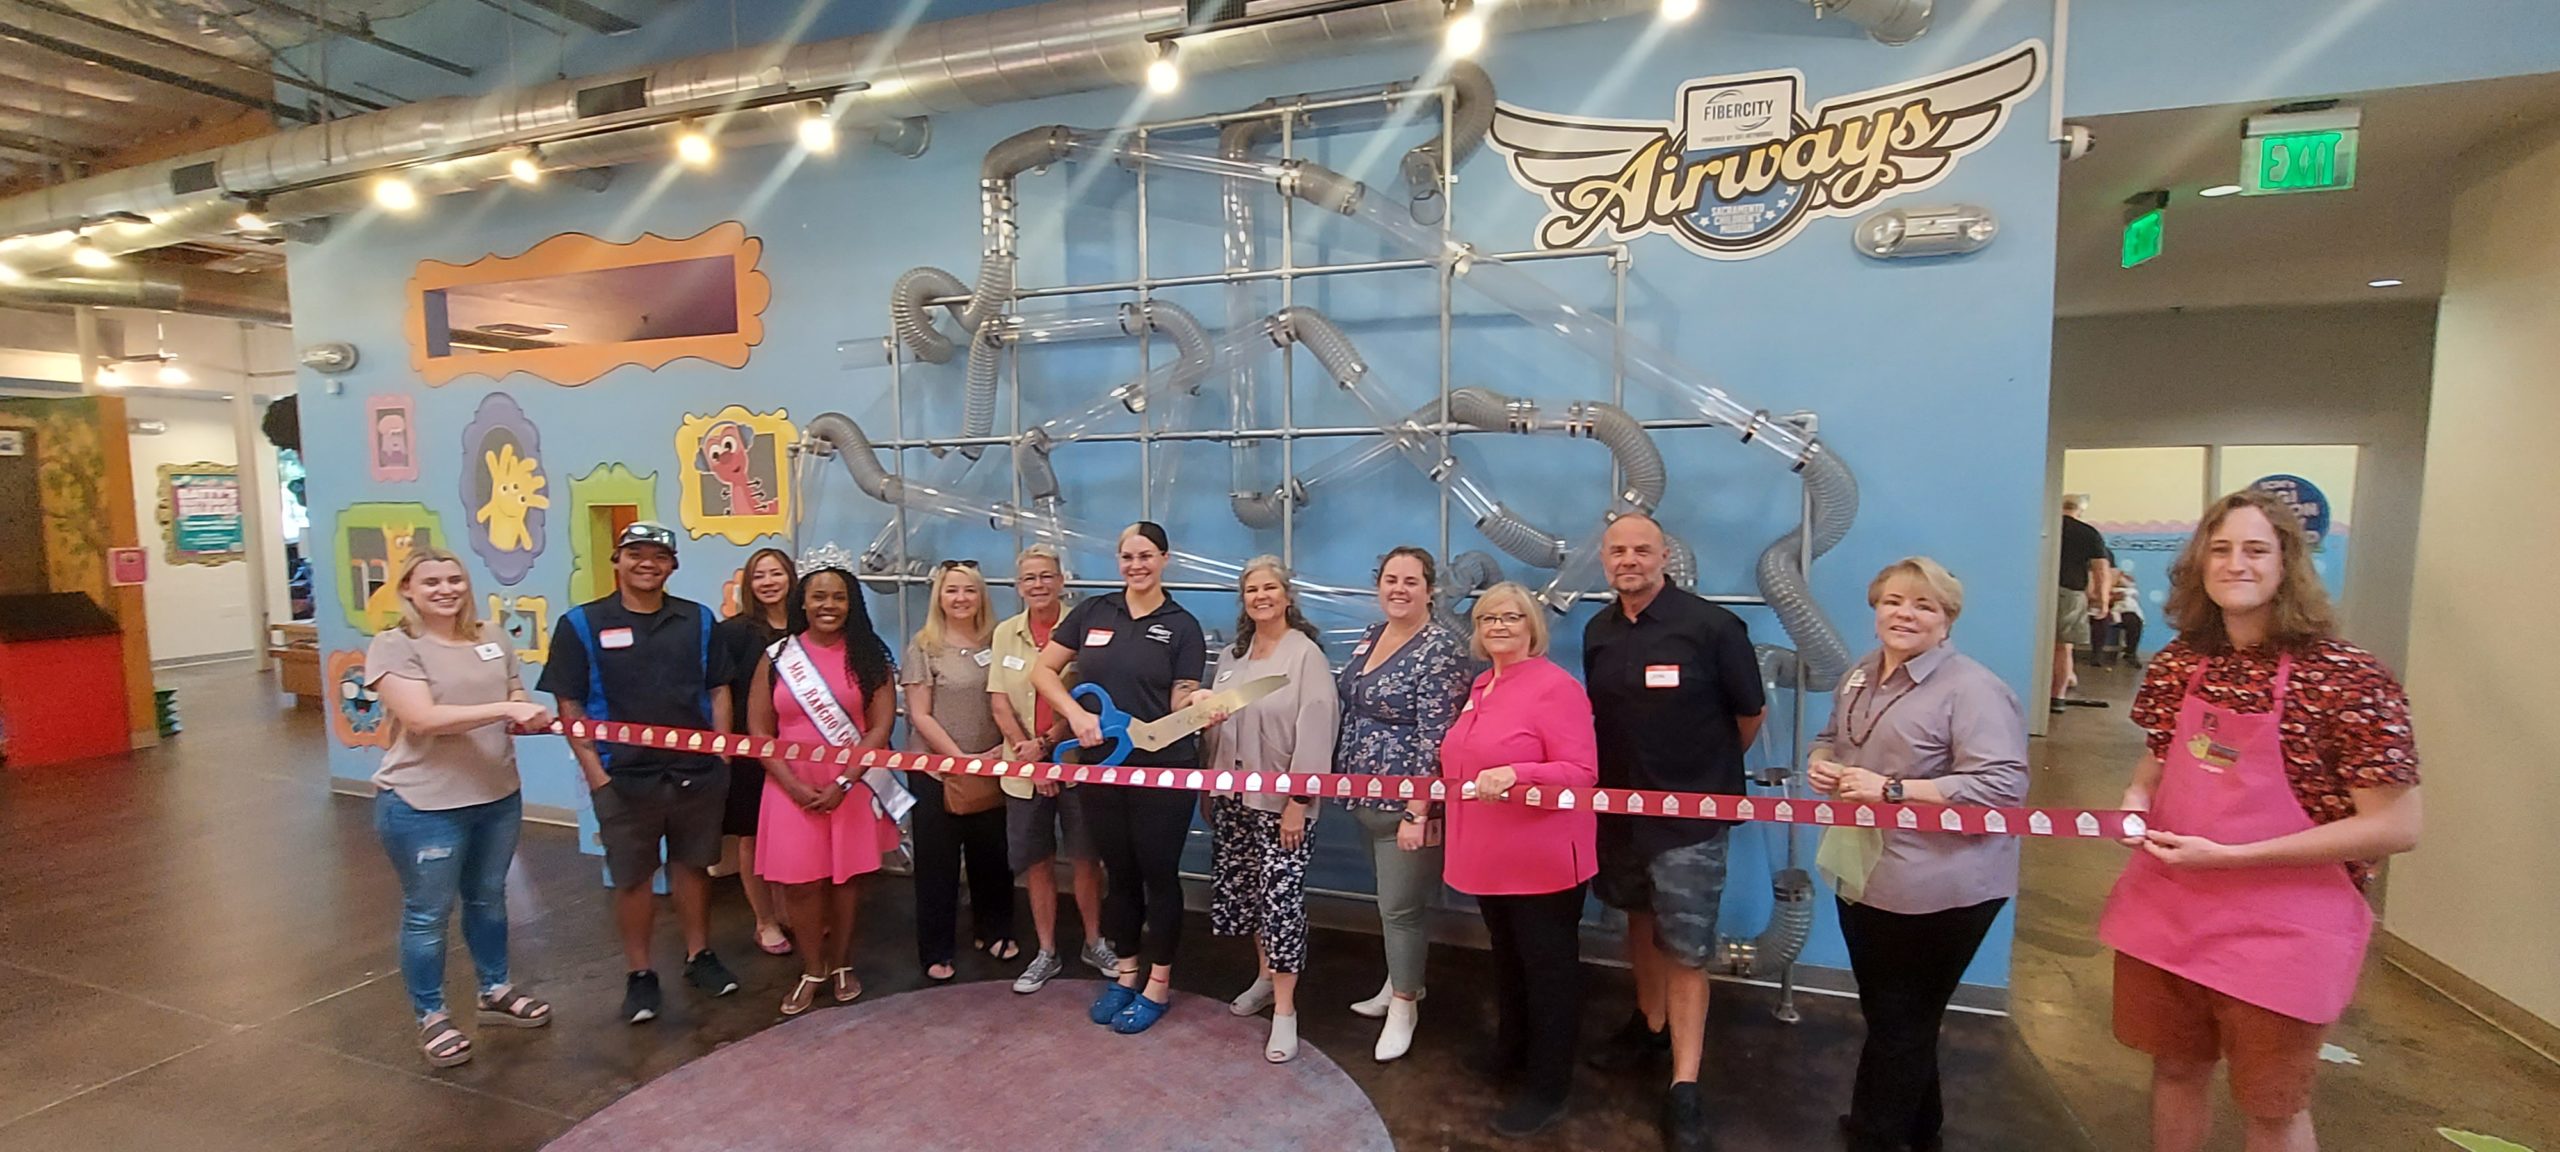 A line of people holding an opening ribbon poses in front of the Airways play exhibit